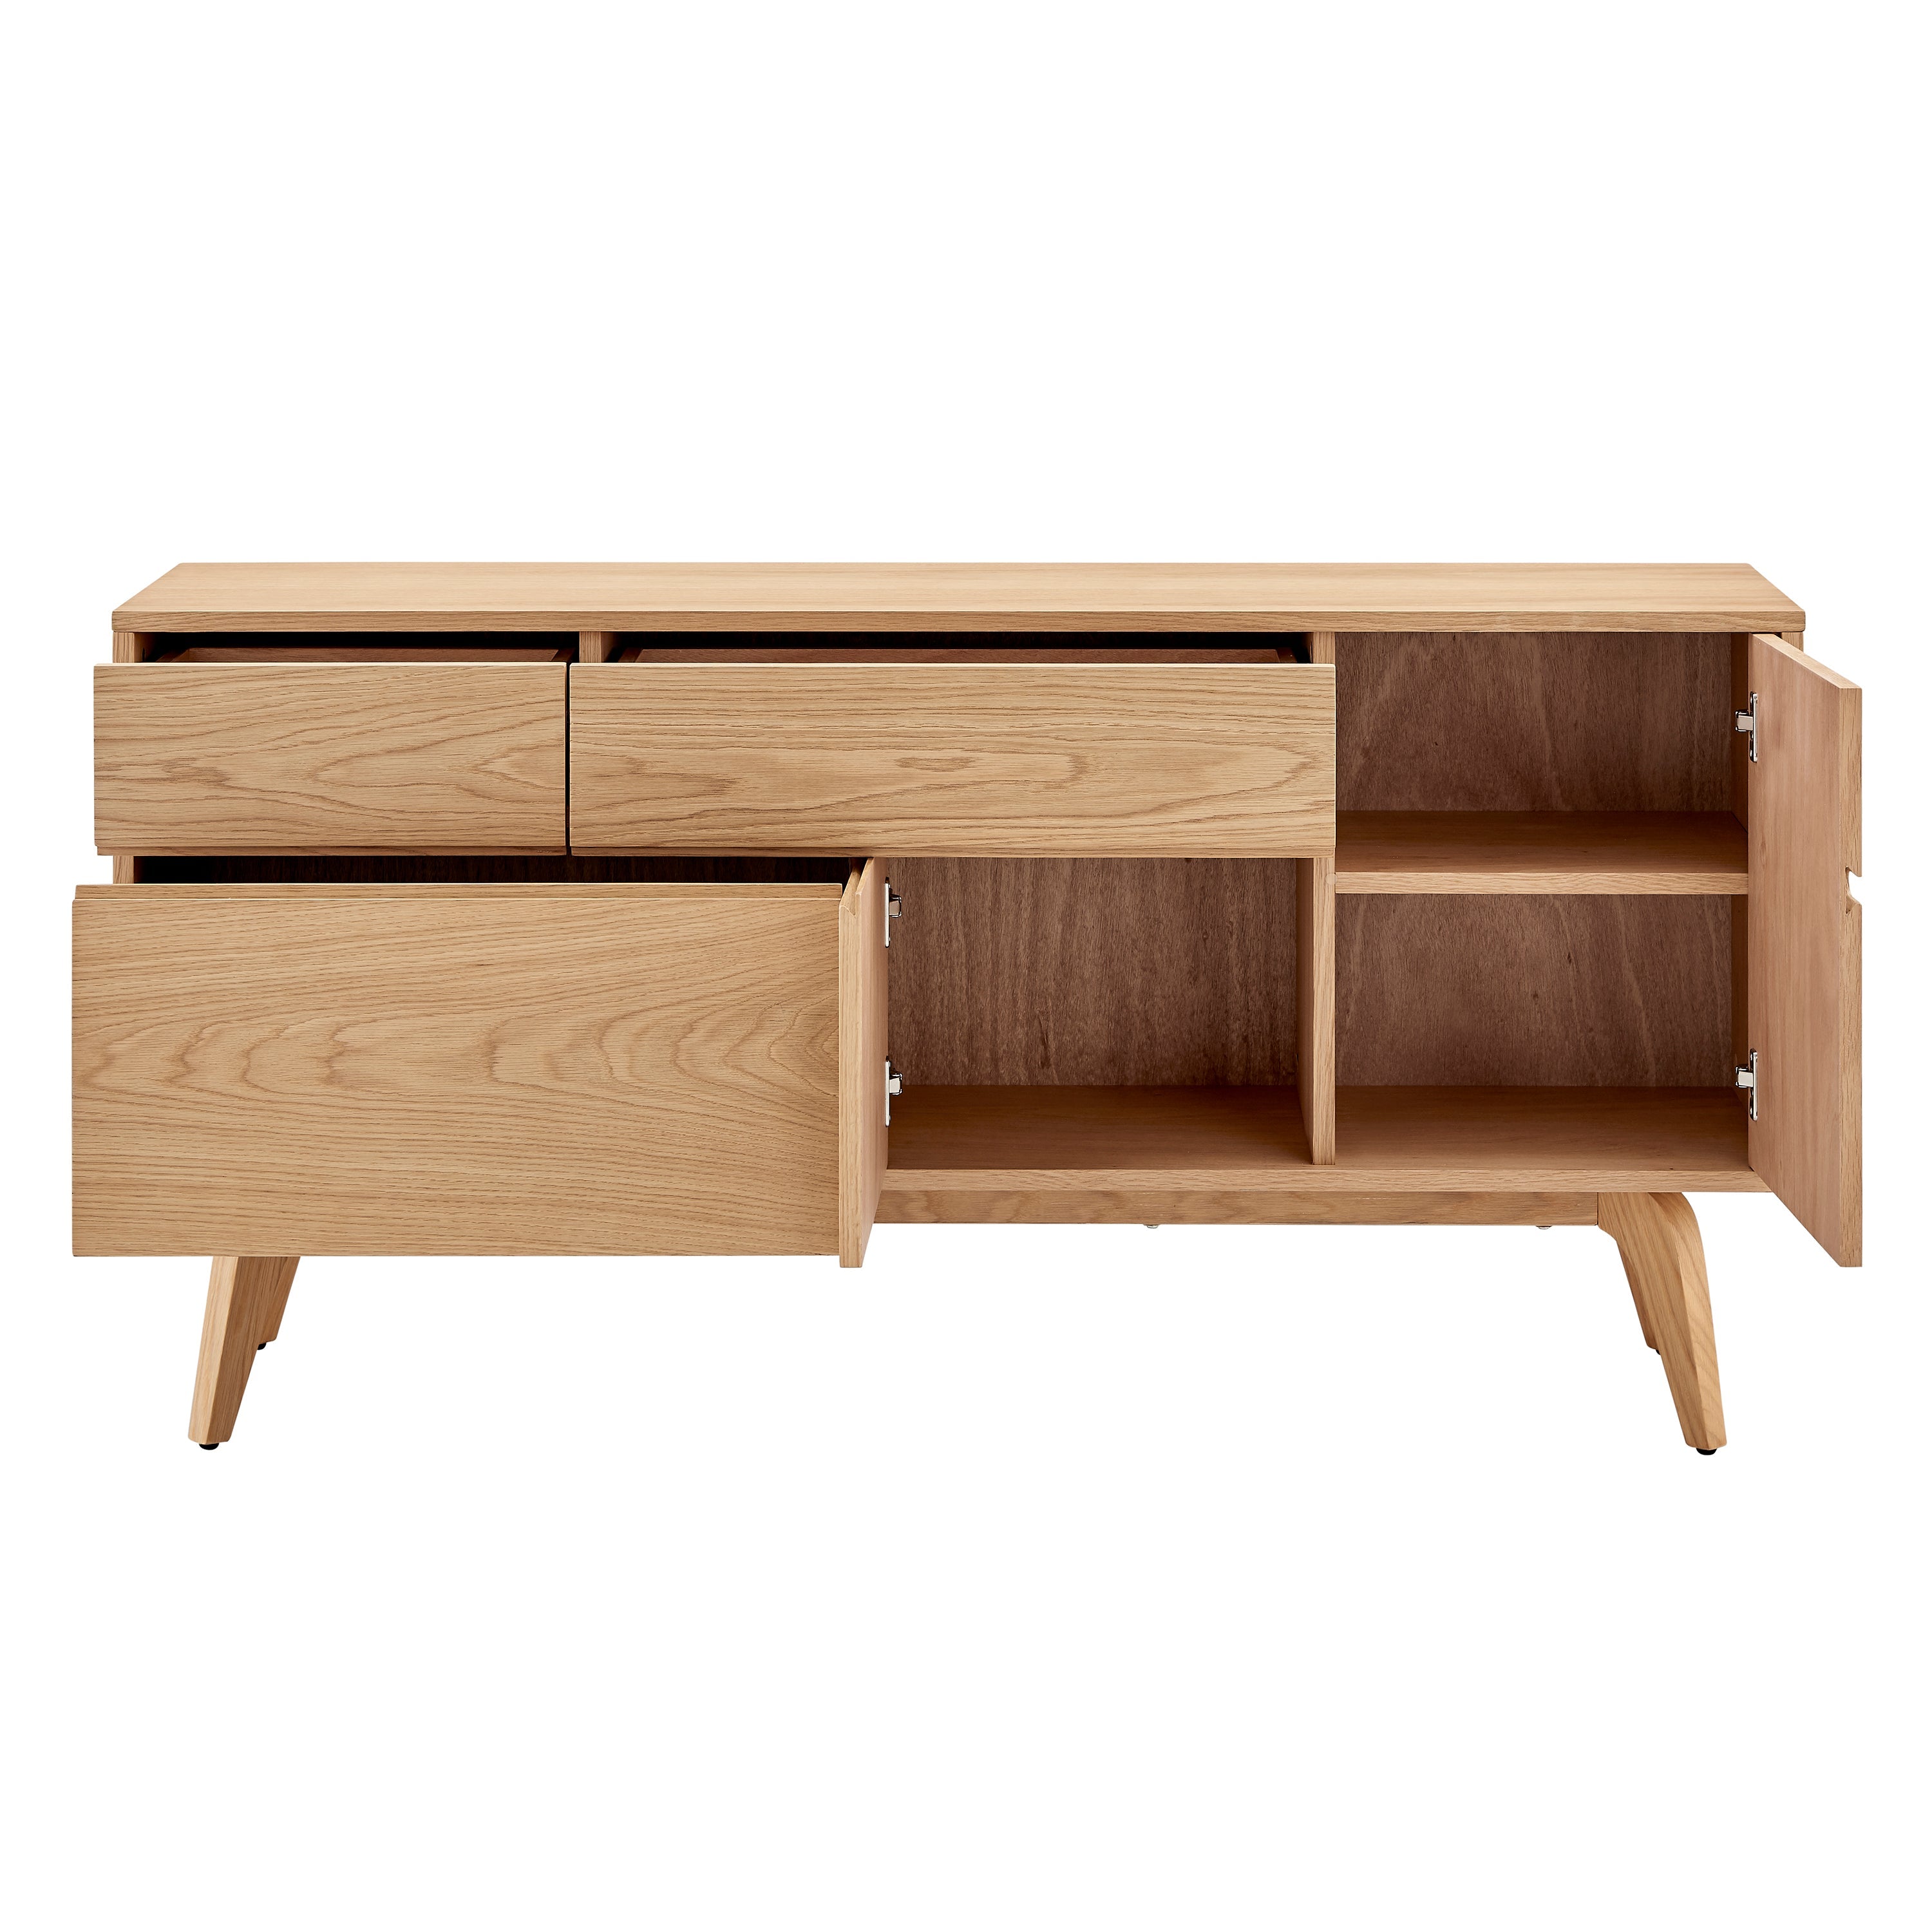 Lawrence Sideboard - What A Room